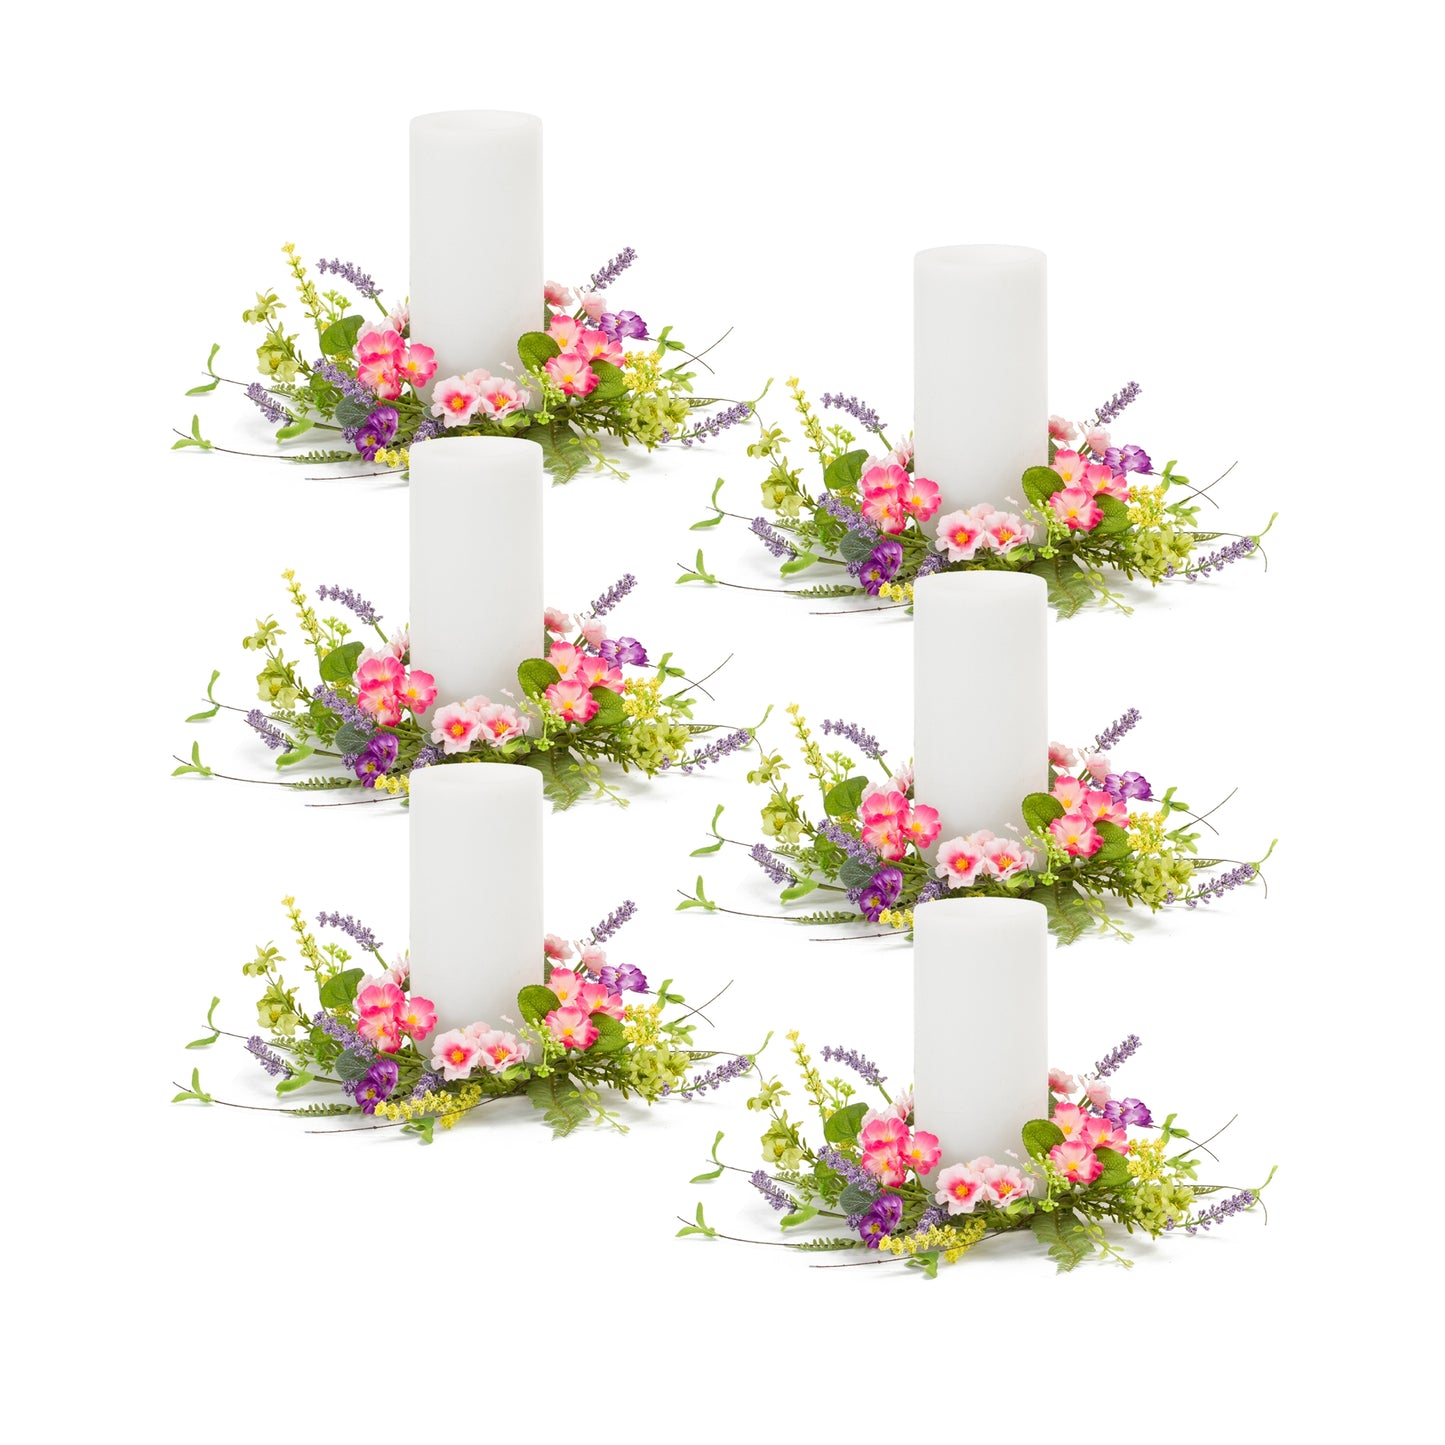 Mixed Floral Candle Ring (Set of 6) 12.5"D Polyester/Plastic (Fits a 4" Candle)